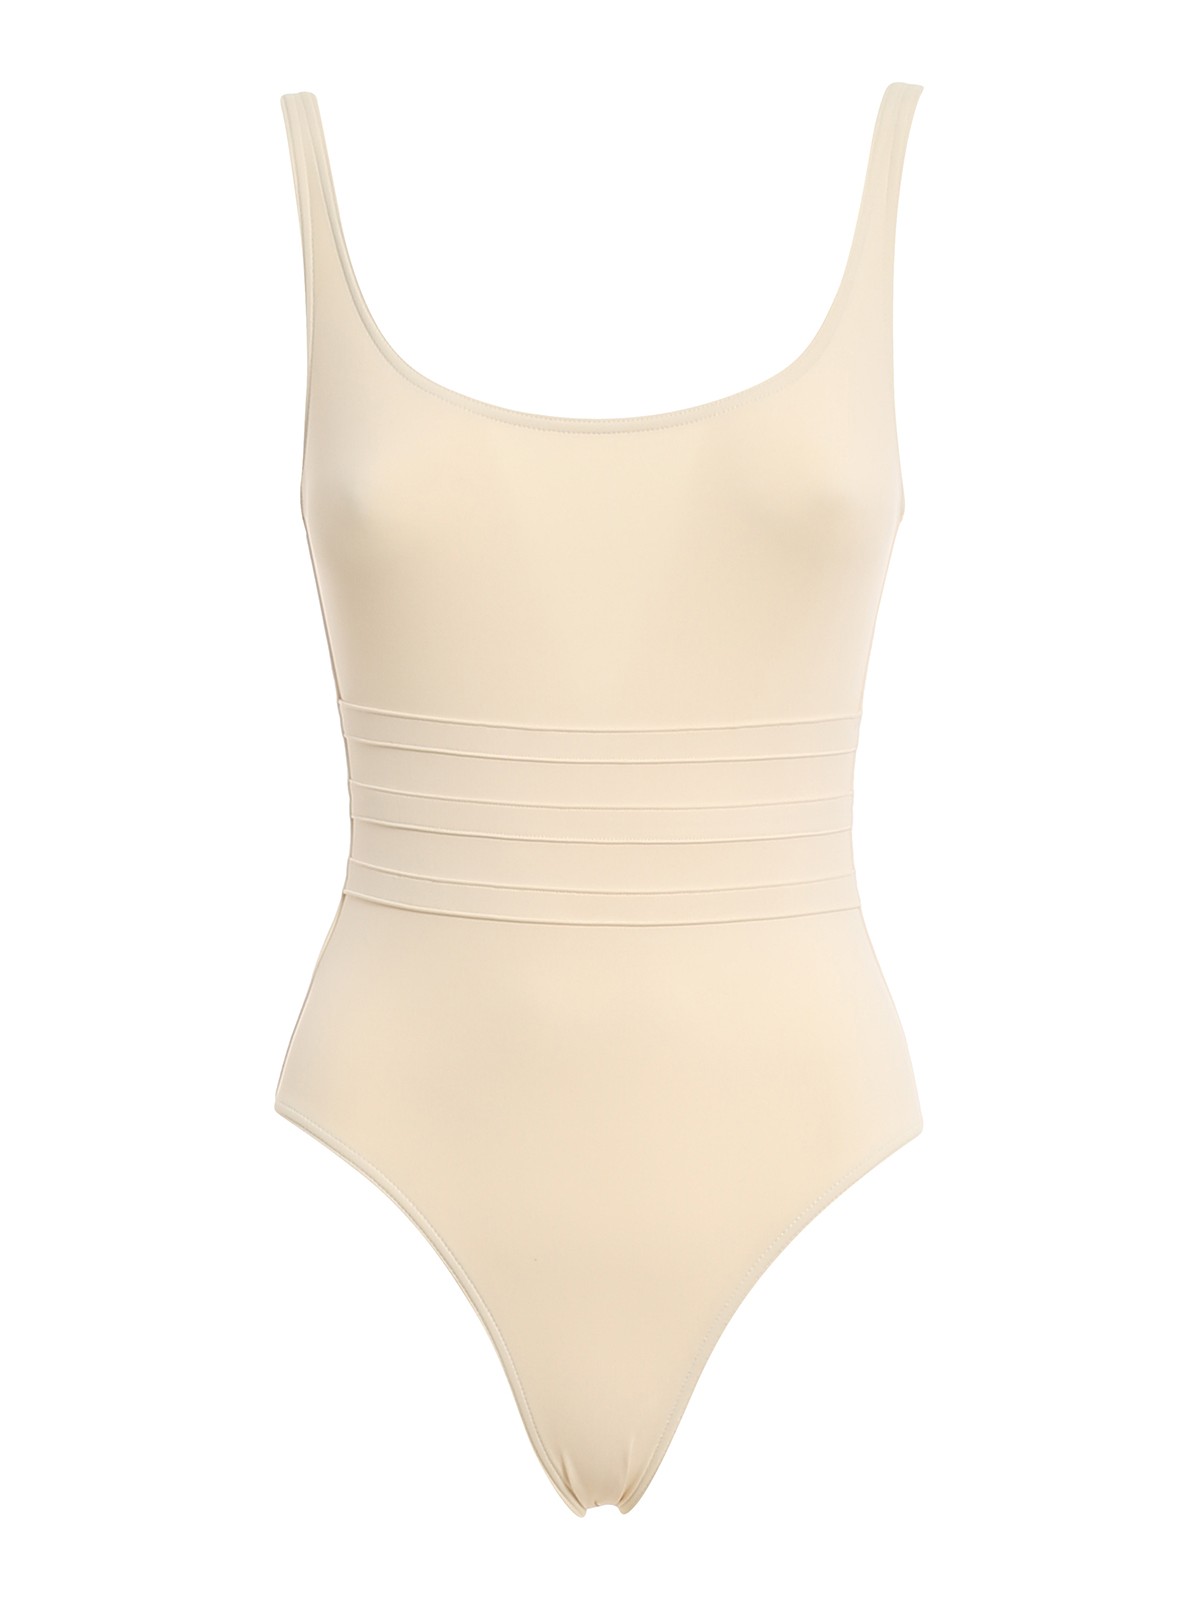 One-piece ERES - Asia swimsuit - 01140122E01092 | Shop online at iKRIX